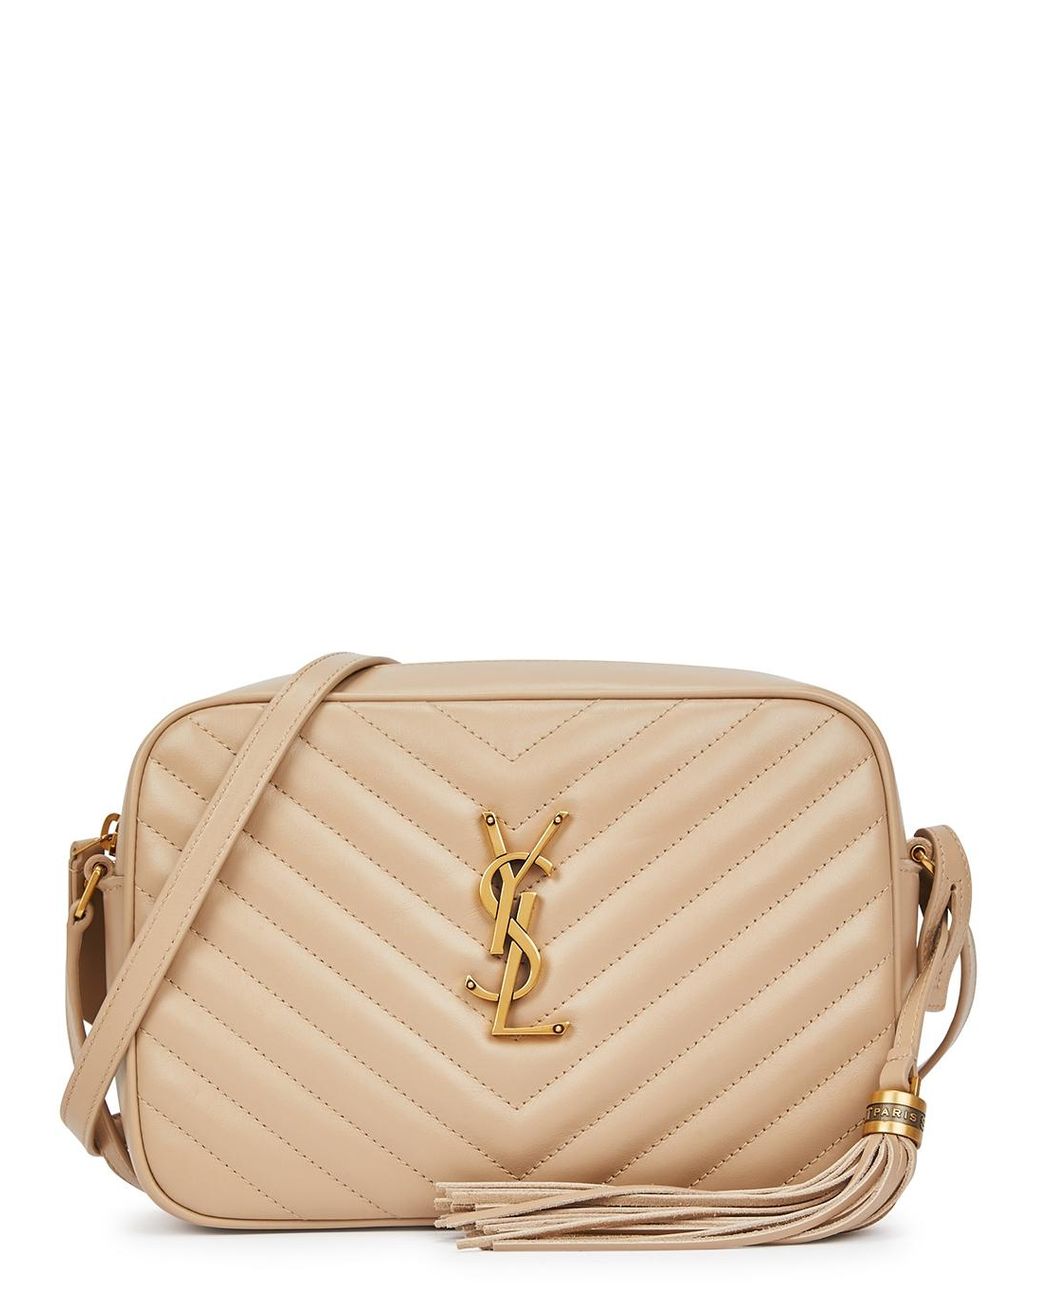 Saint Laurent Lou Leather Cross-body Bag in Natural | Lyst